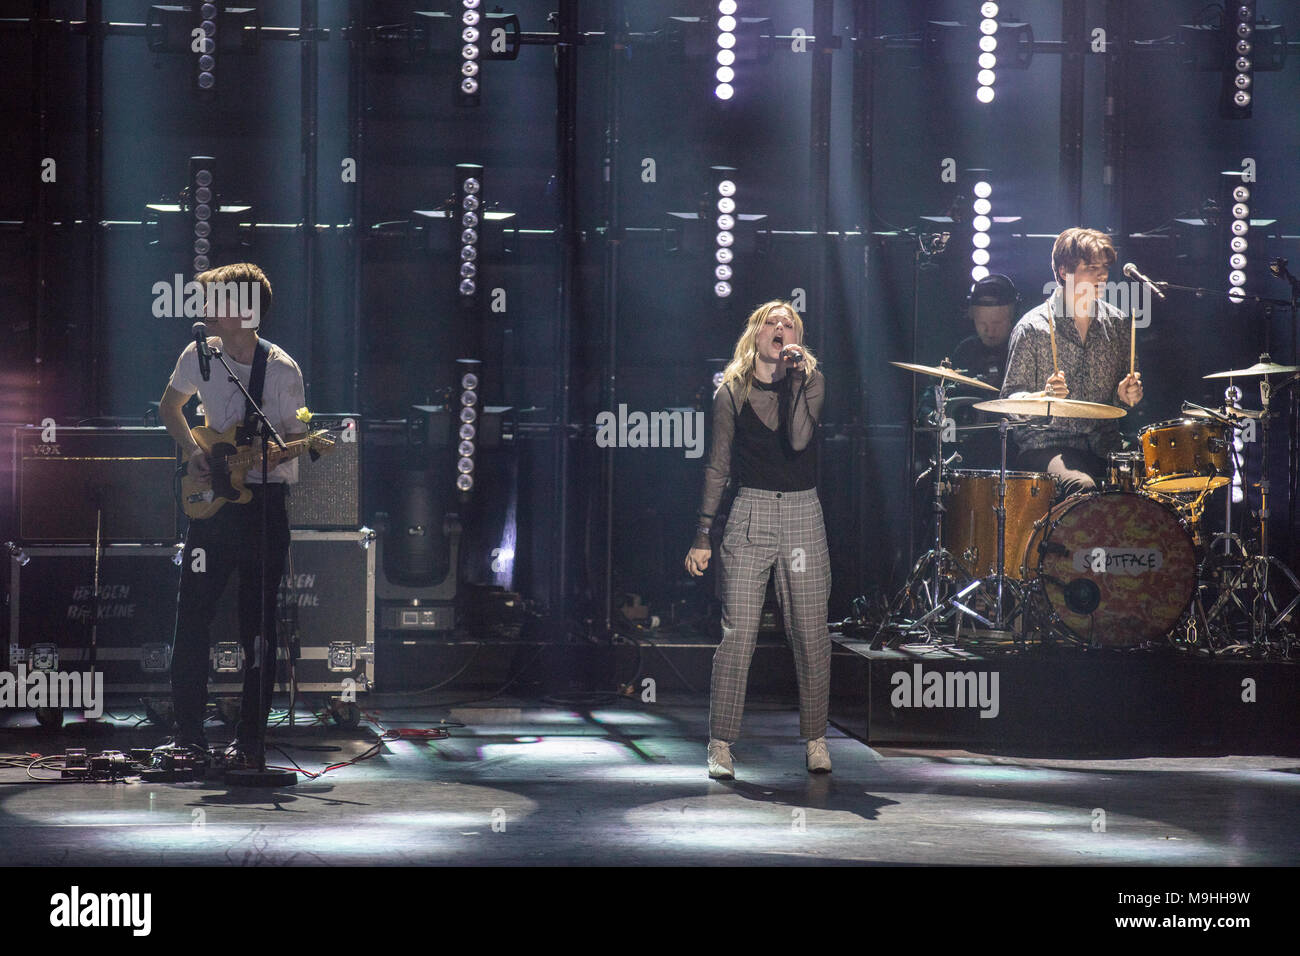 Norway, Oslo - February 25, 2018. The Norwegian pop-rock band Sløtface (formerly known as Slutface) performs live during the Norwegian Grammy Awards, Spellemannprisen 2017, at Oslo Konserthus in Oslo. (Photo credit: Gonzales Photo - Stian S. Moller). Stock Photo